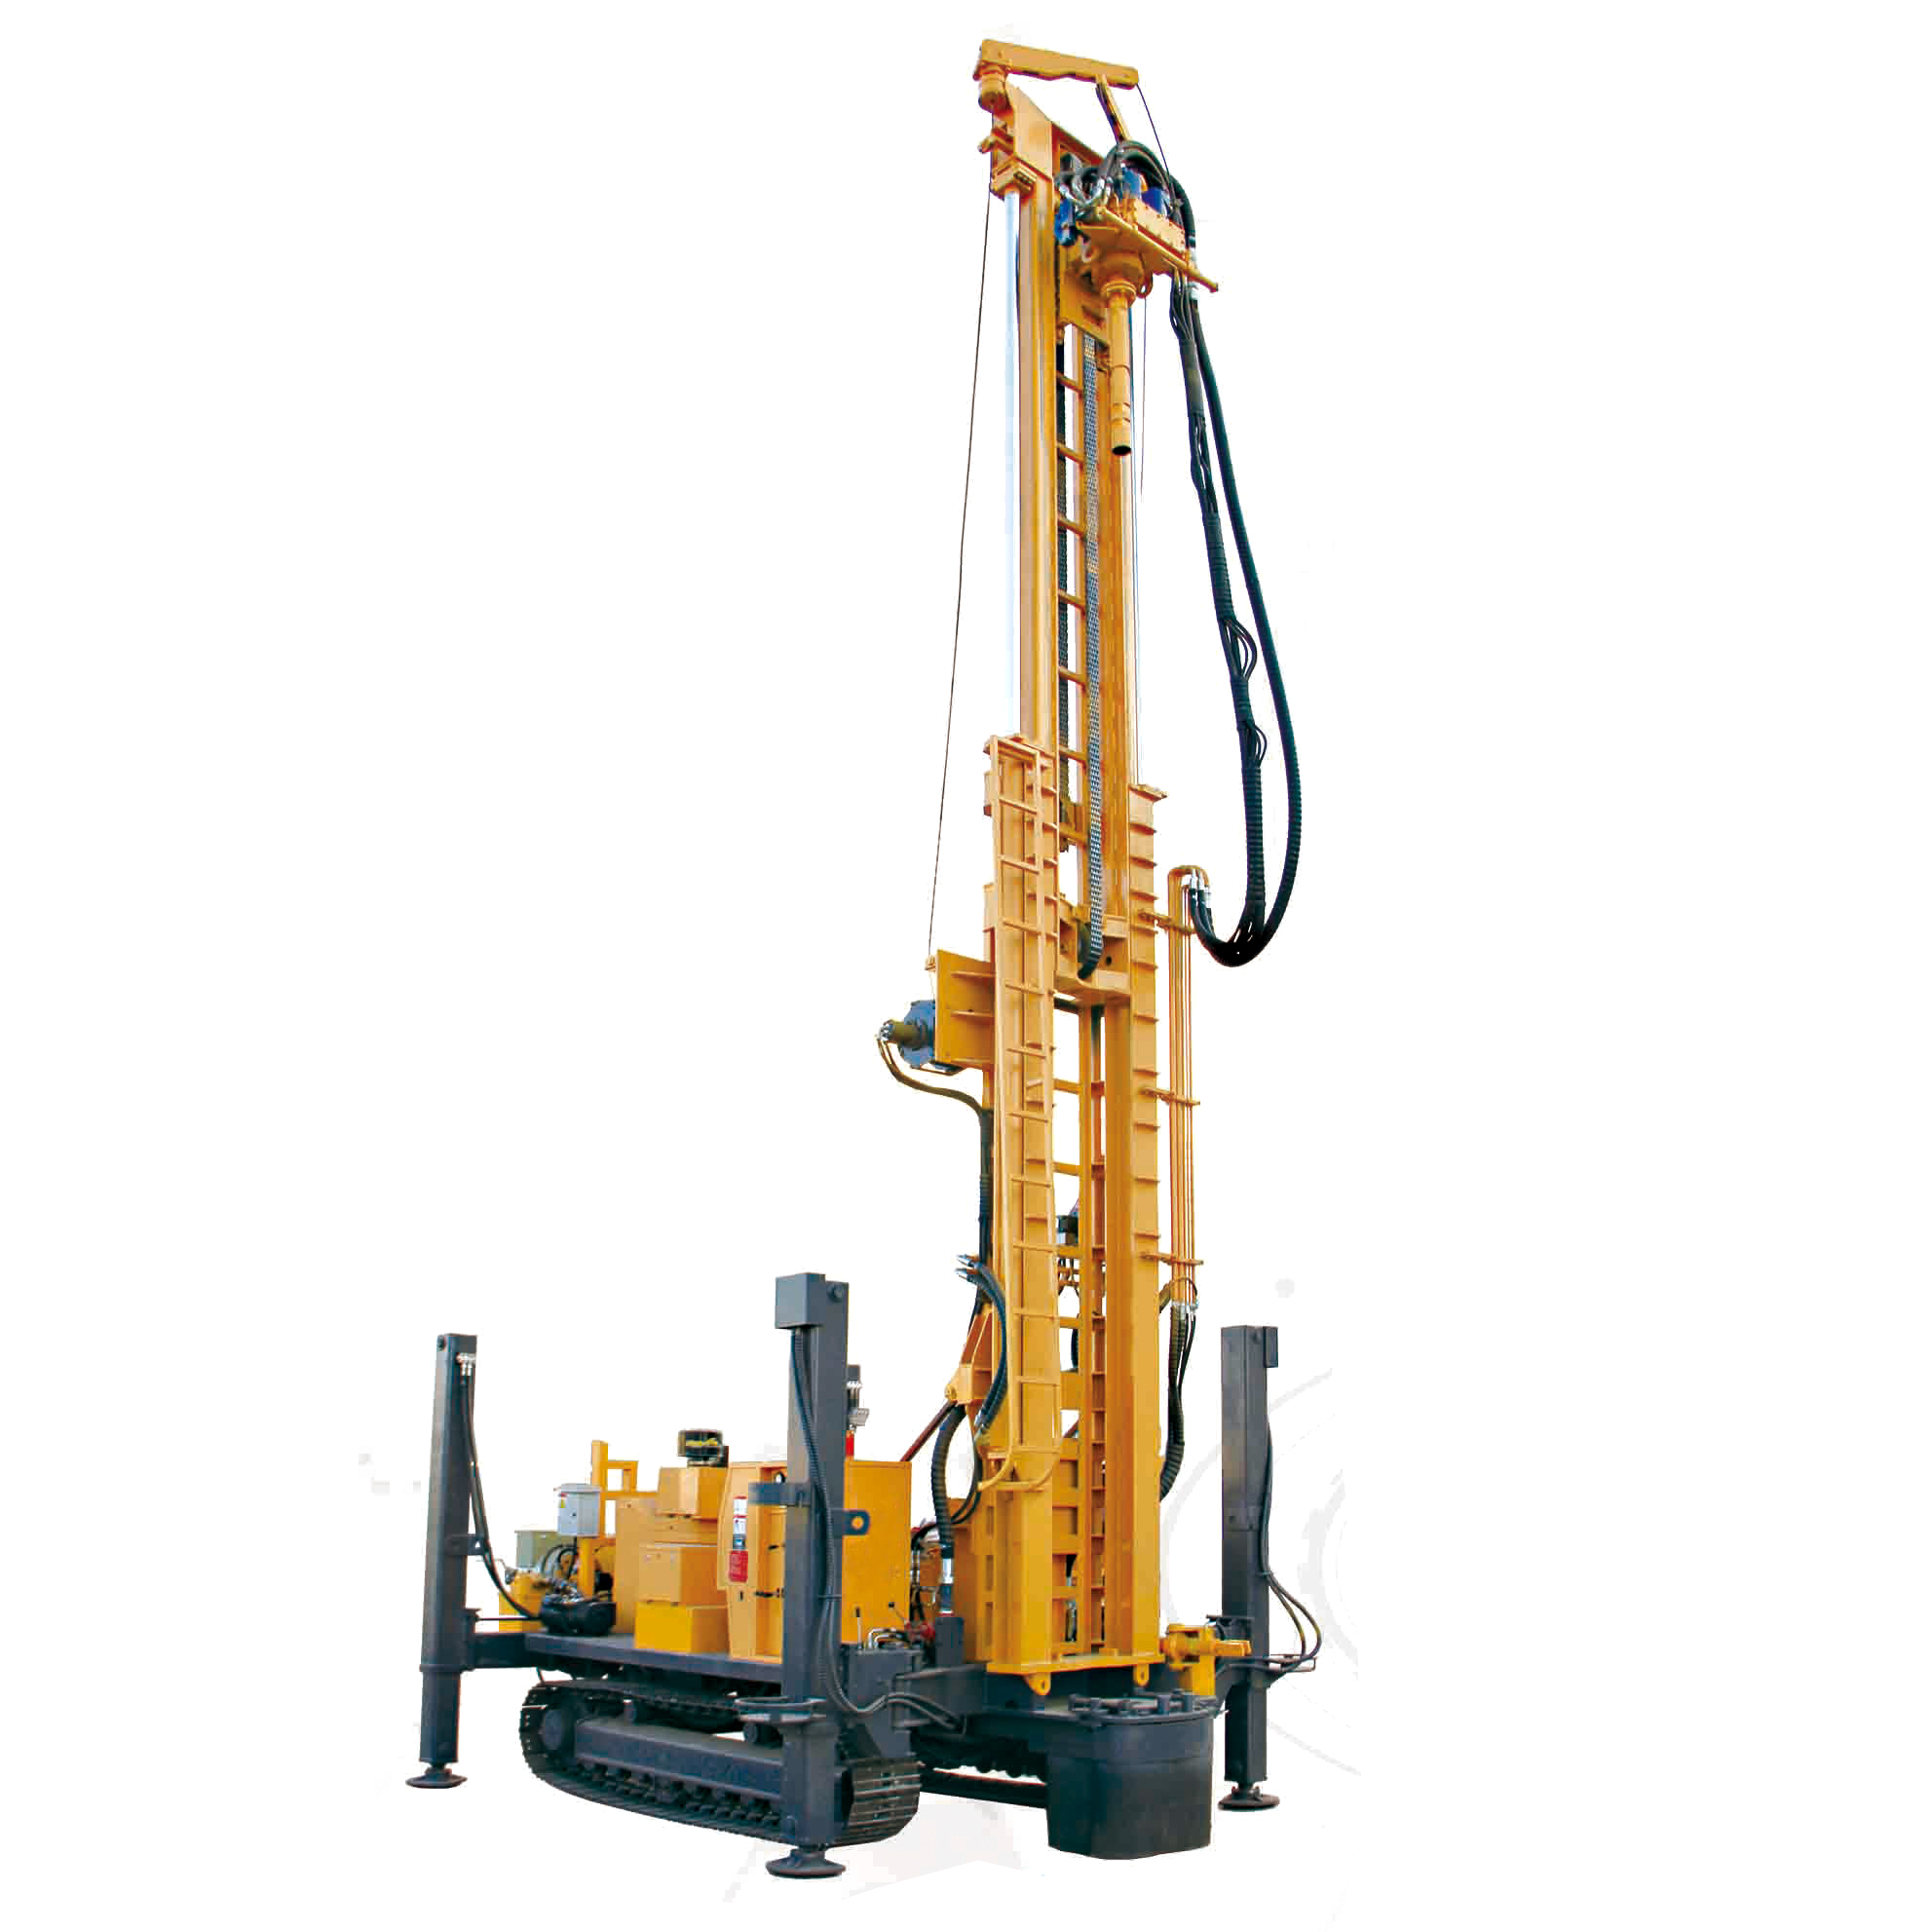 SNR600 Water Well Drilling Rig Featured Image